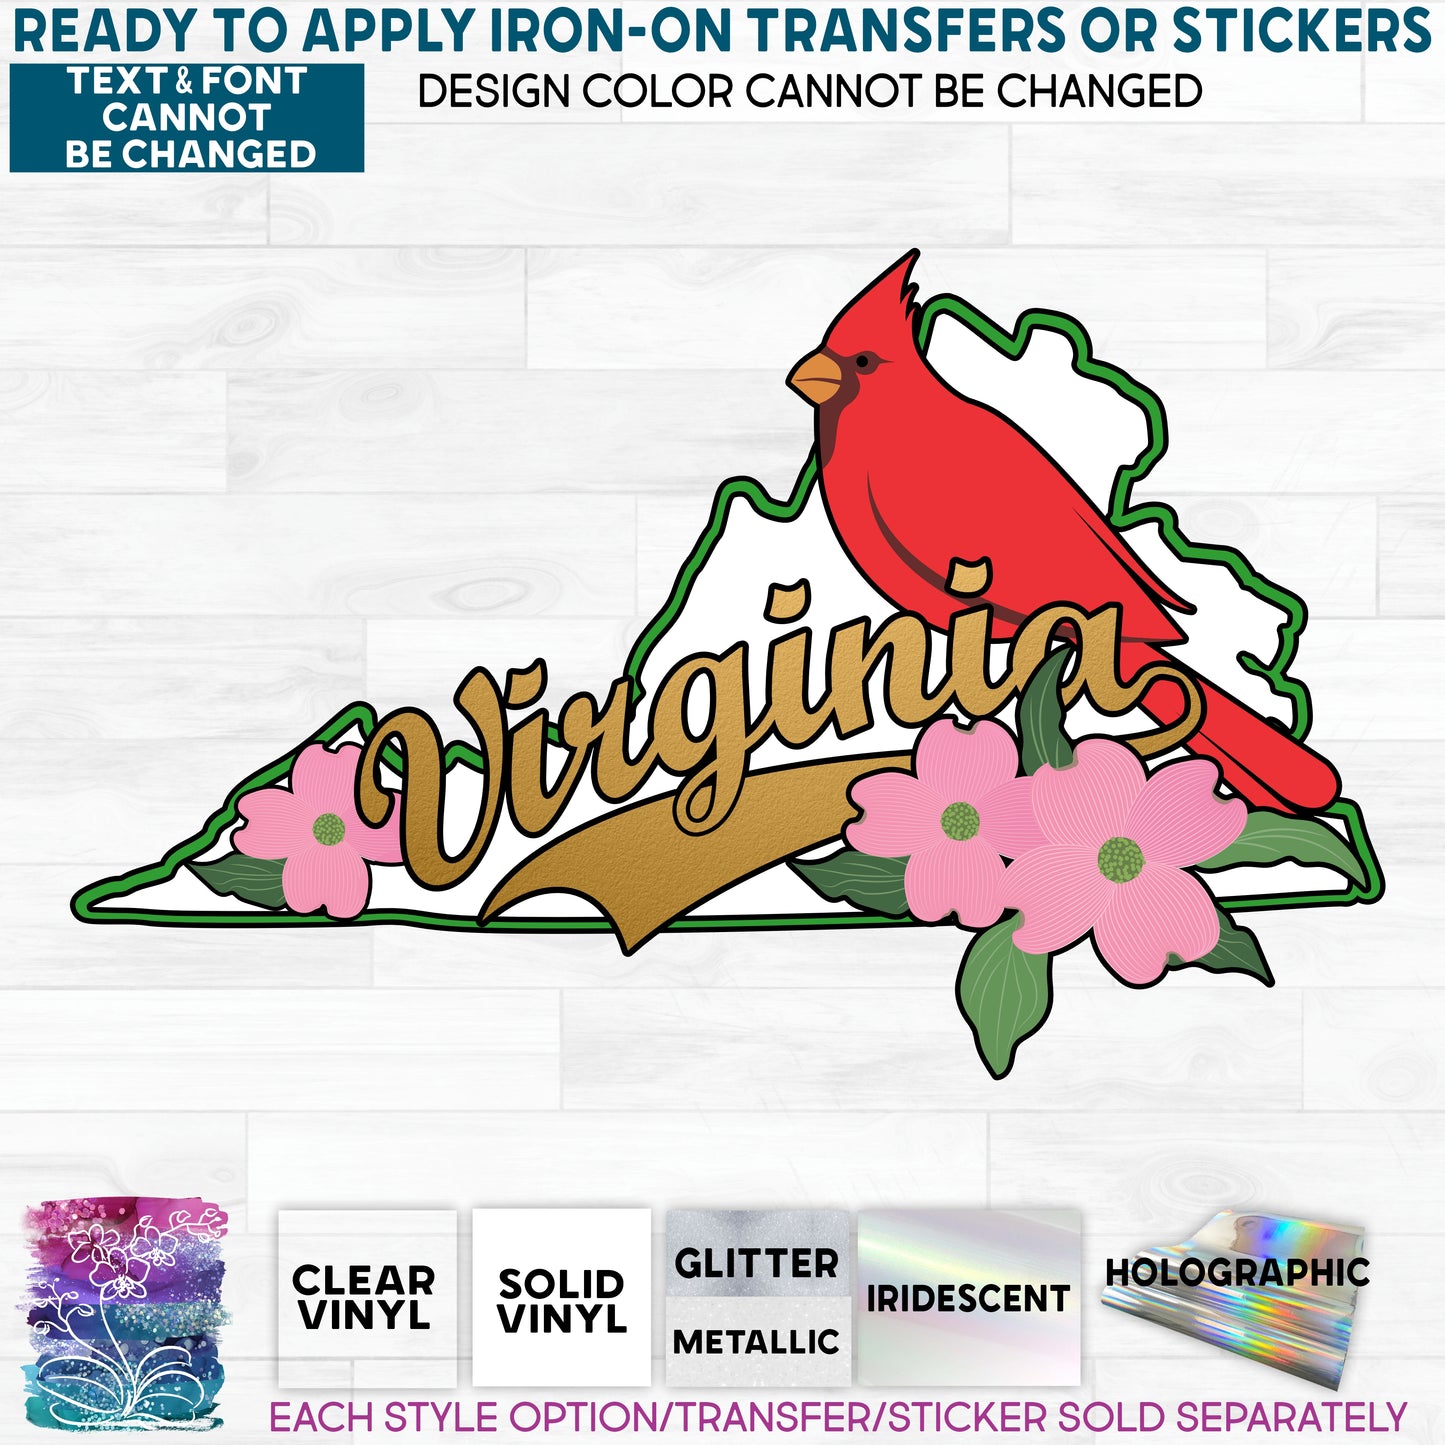 (s206-M) Virginia State Outline with Flower & Bird Glitter or Vinyl Iron-On Transfer or Sticker